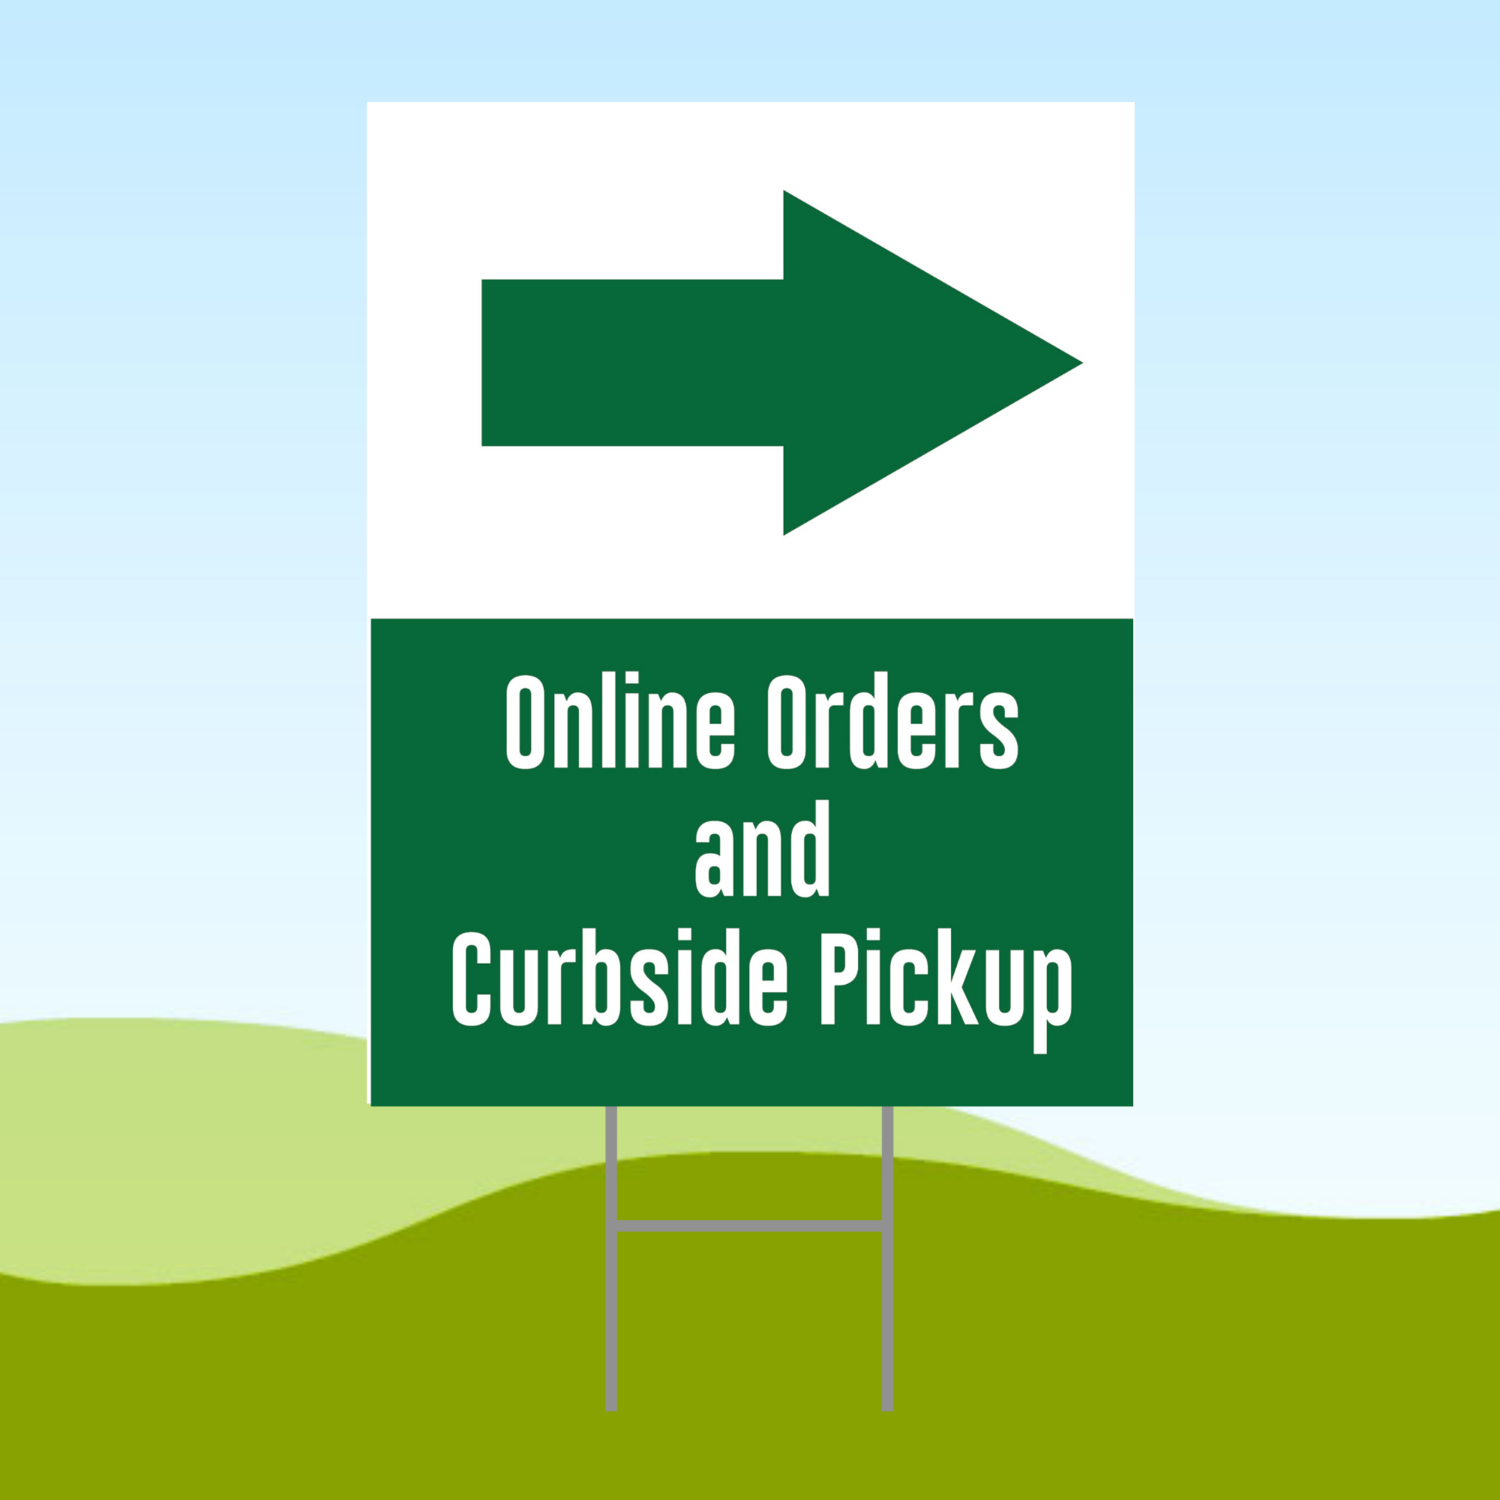 Online Orders and Curbside Pickup RIGHT 18x24 Yard Sign WITH STAKE Corrugated Bandit